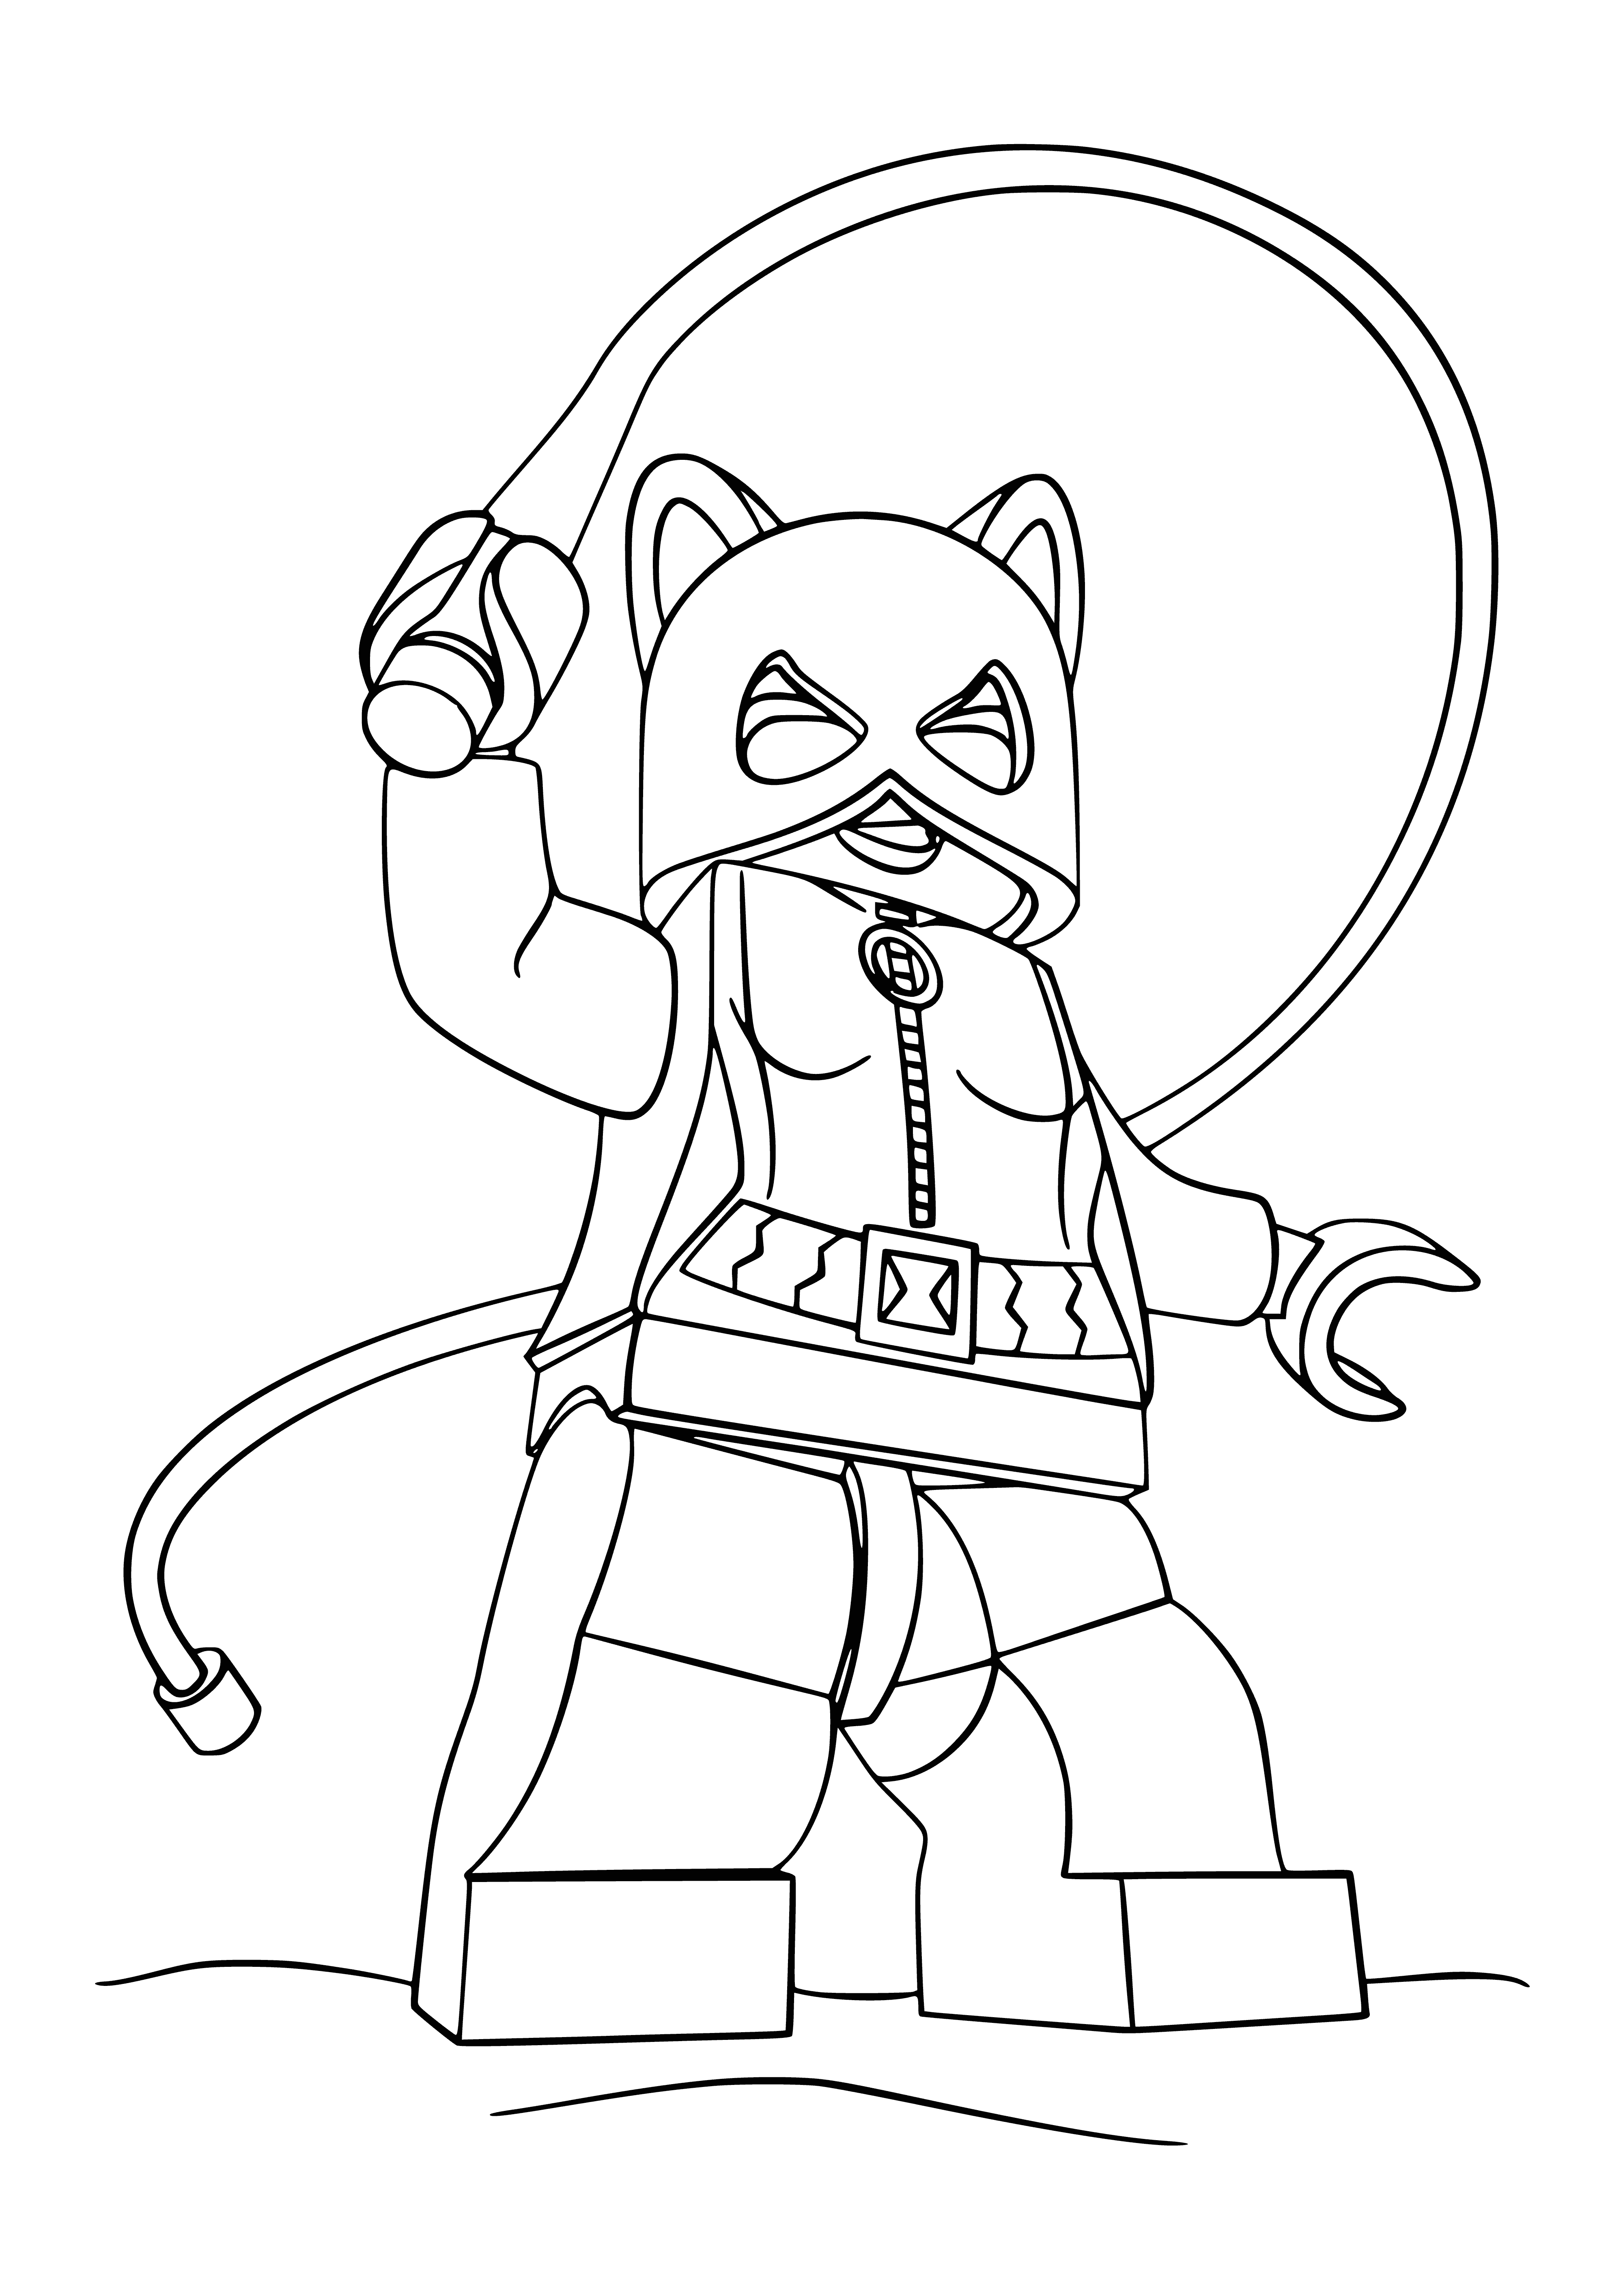 coloring page: Catwoman sits on a rooftop, holding a whip, with her black mask covering her eyes. Wearing a black outfit, green belt, and green boots.